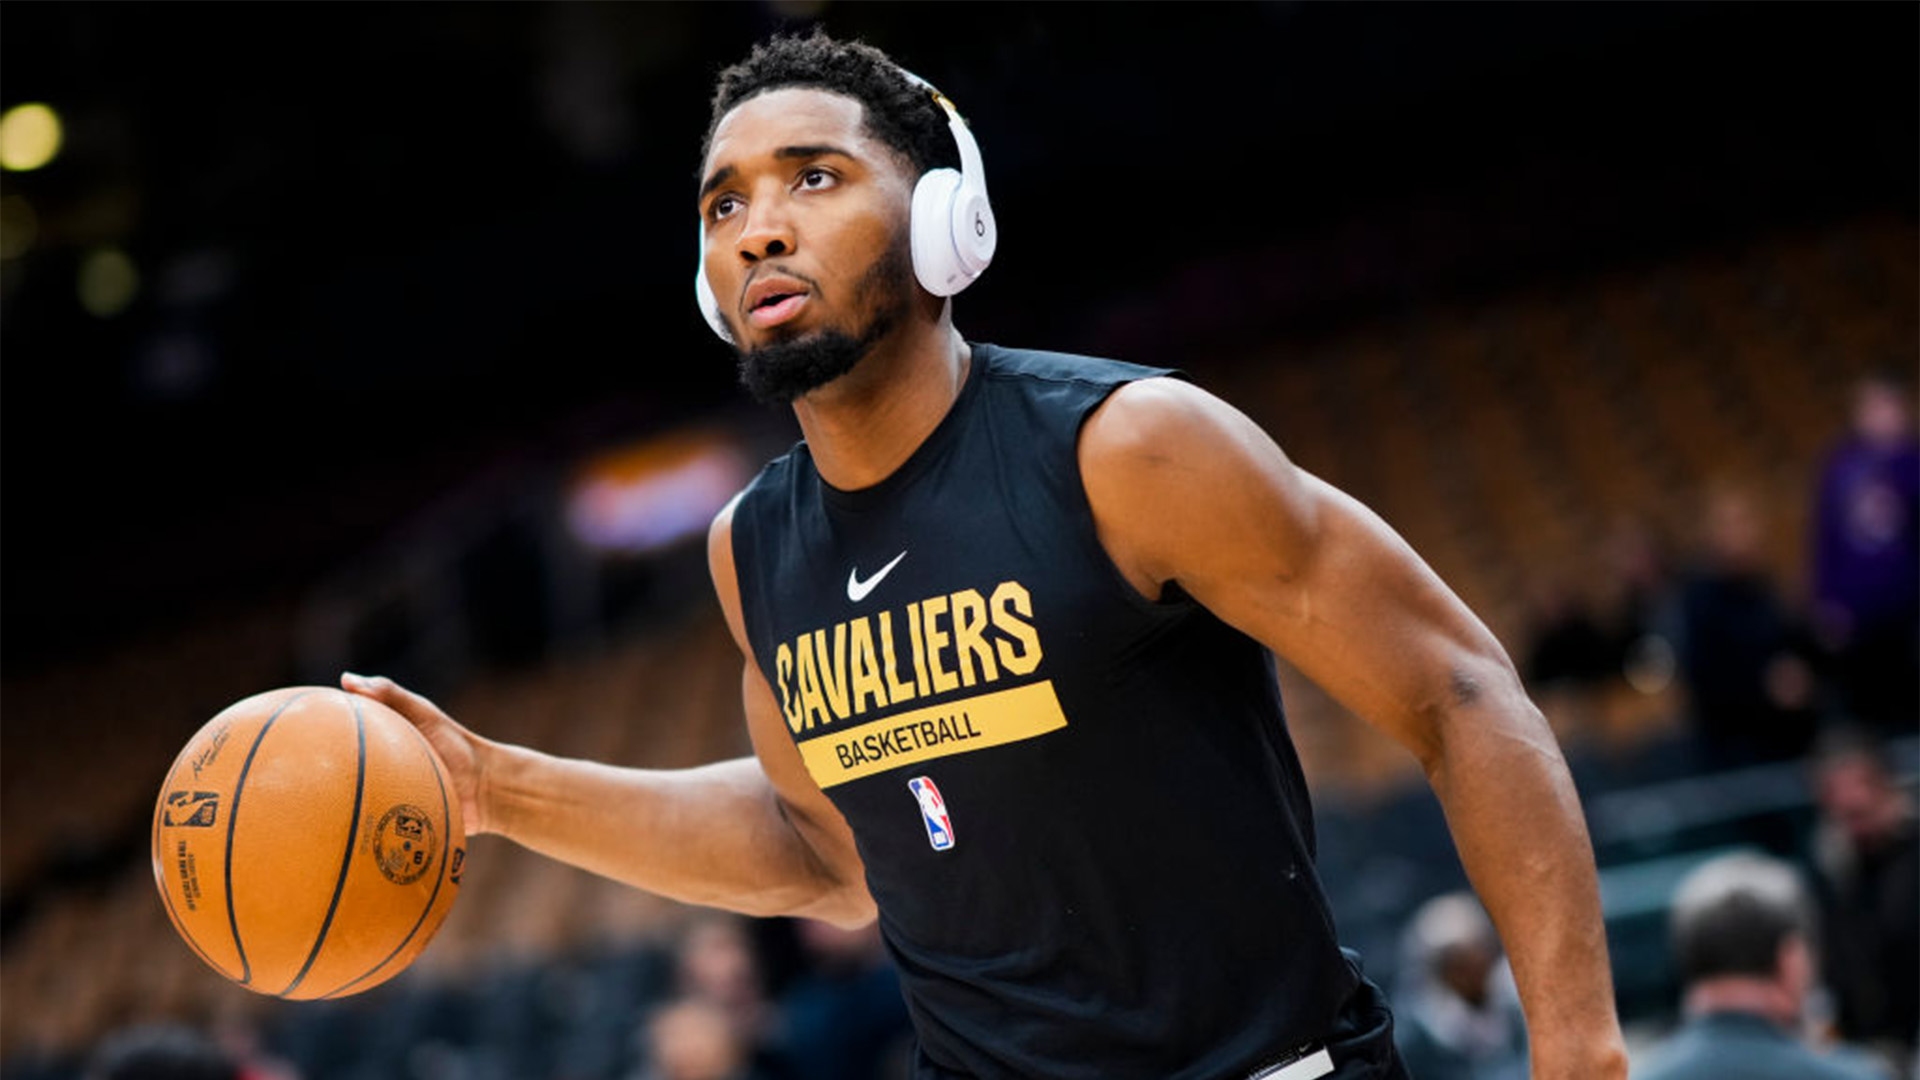 Donovan Mitchell Breaks Down How He Made Sure His Family Was Set With His First $1M In The NBA